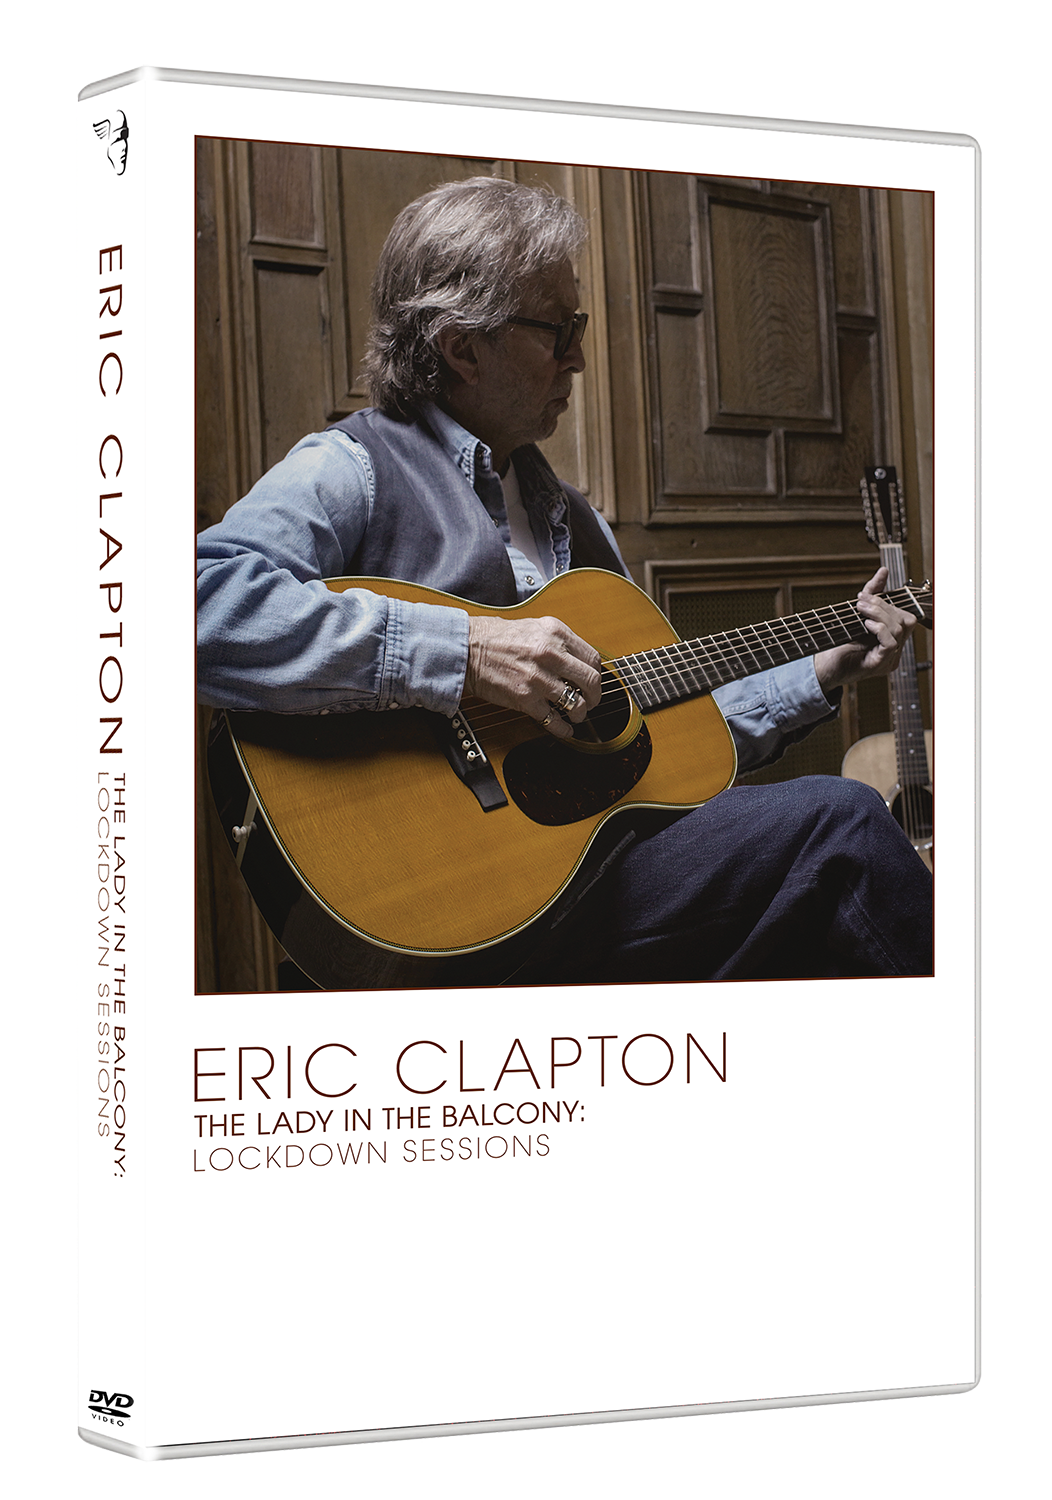 Eric Clapton - The Lady In The Balcony - Lockdown Sessions: DVD